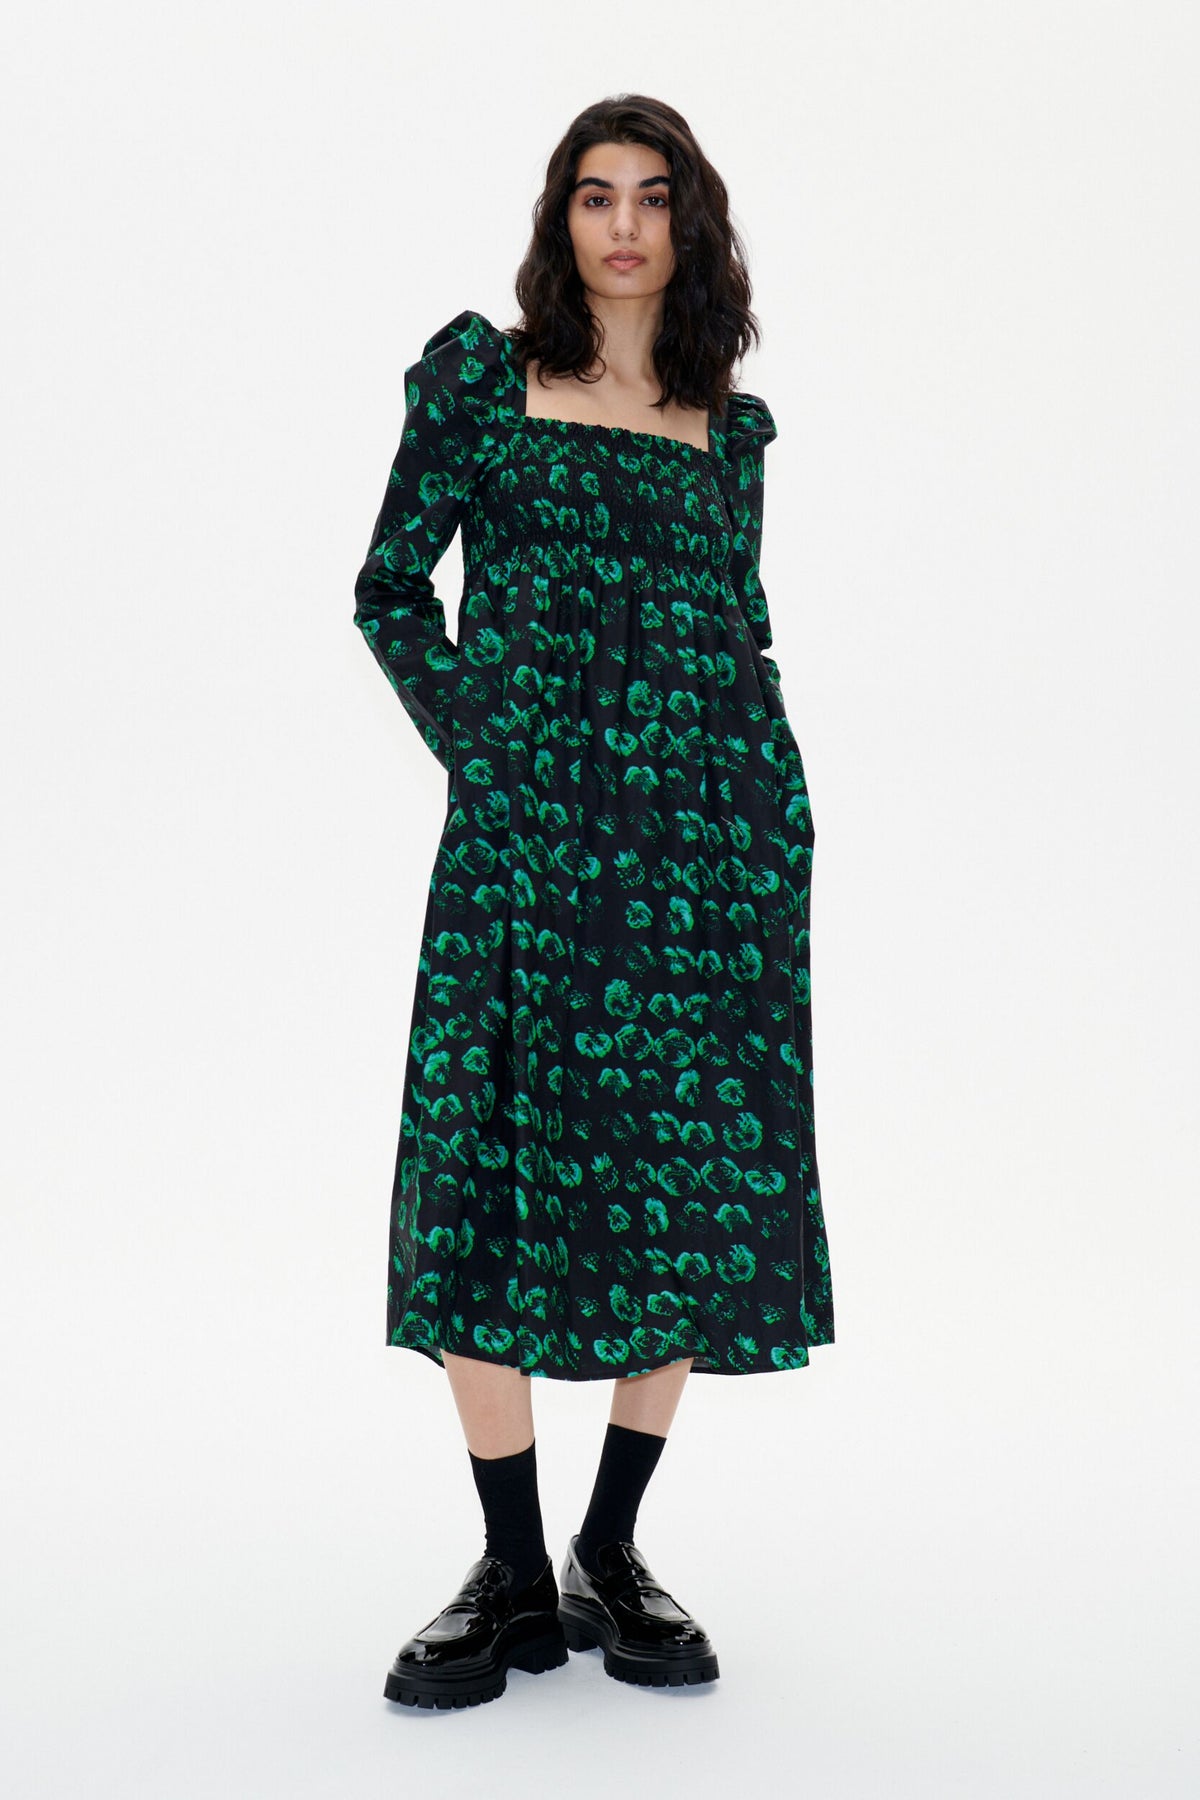 Cotton square necked dress with shirred panel and green pansy print